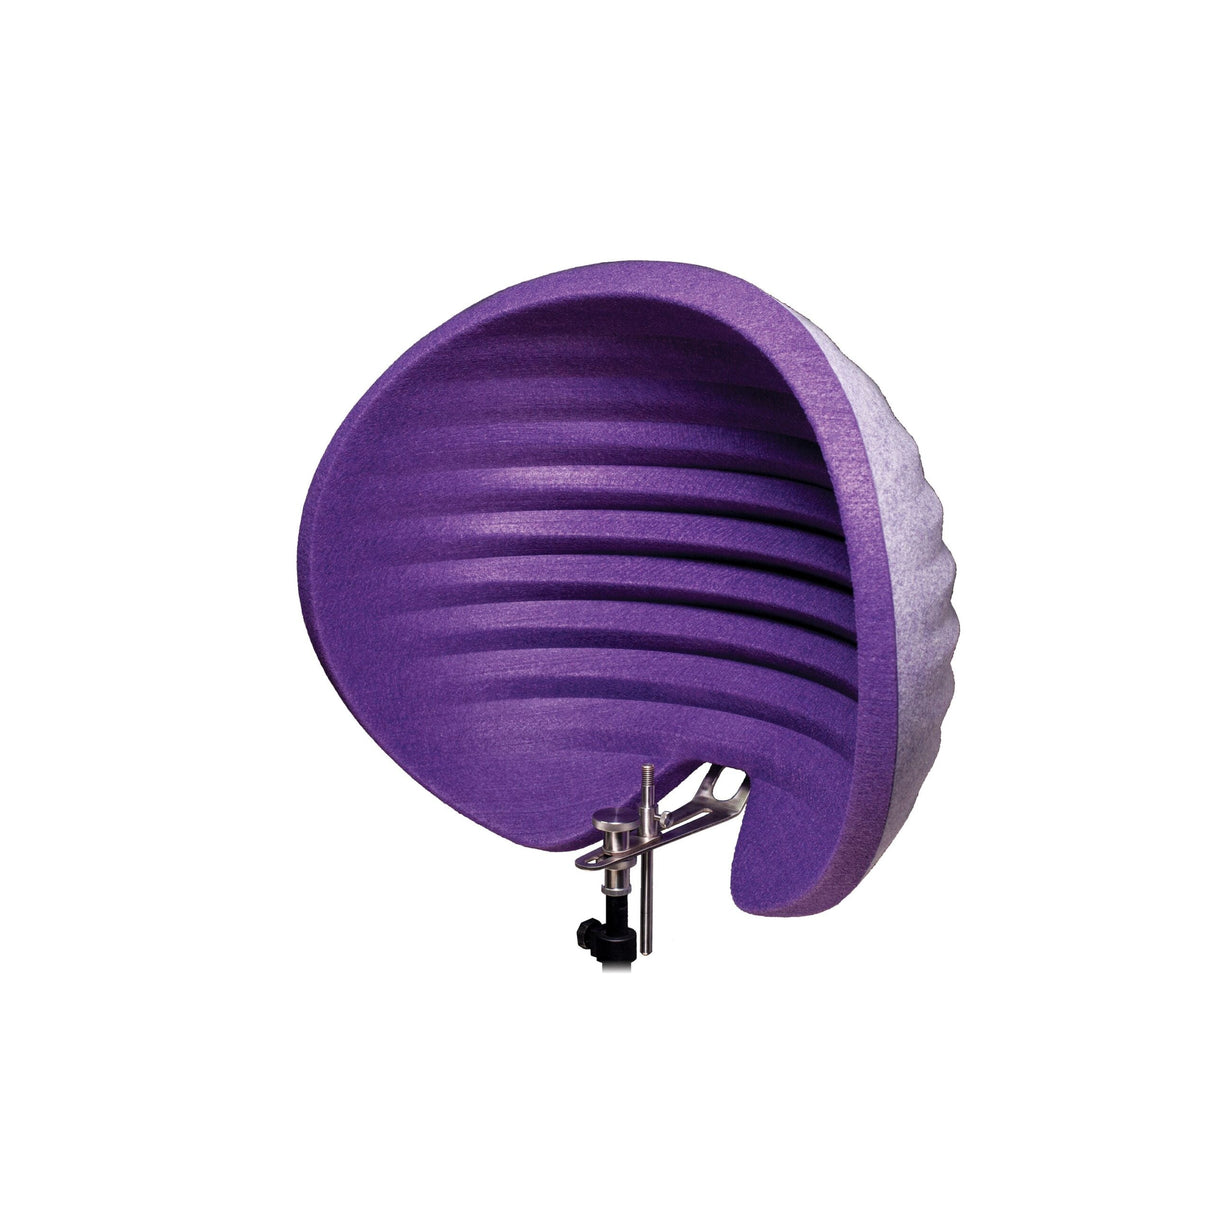 Aston Microphones Halo Reflection Filter and Portable Vocal Booth, Purple (Used)